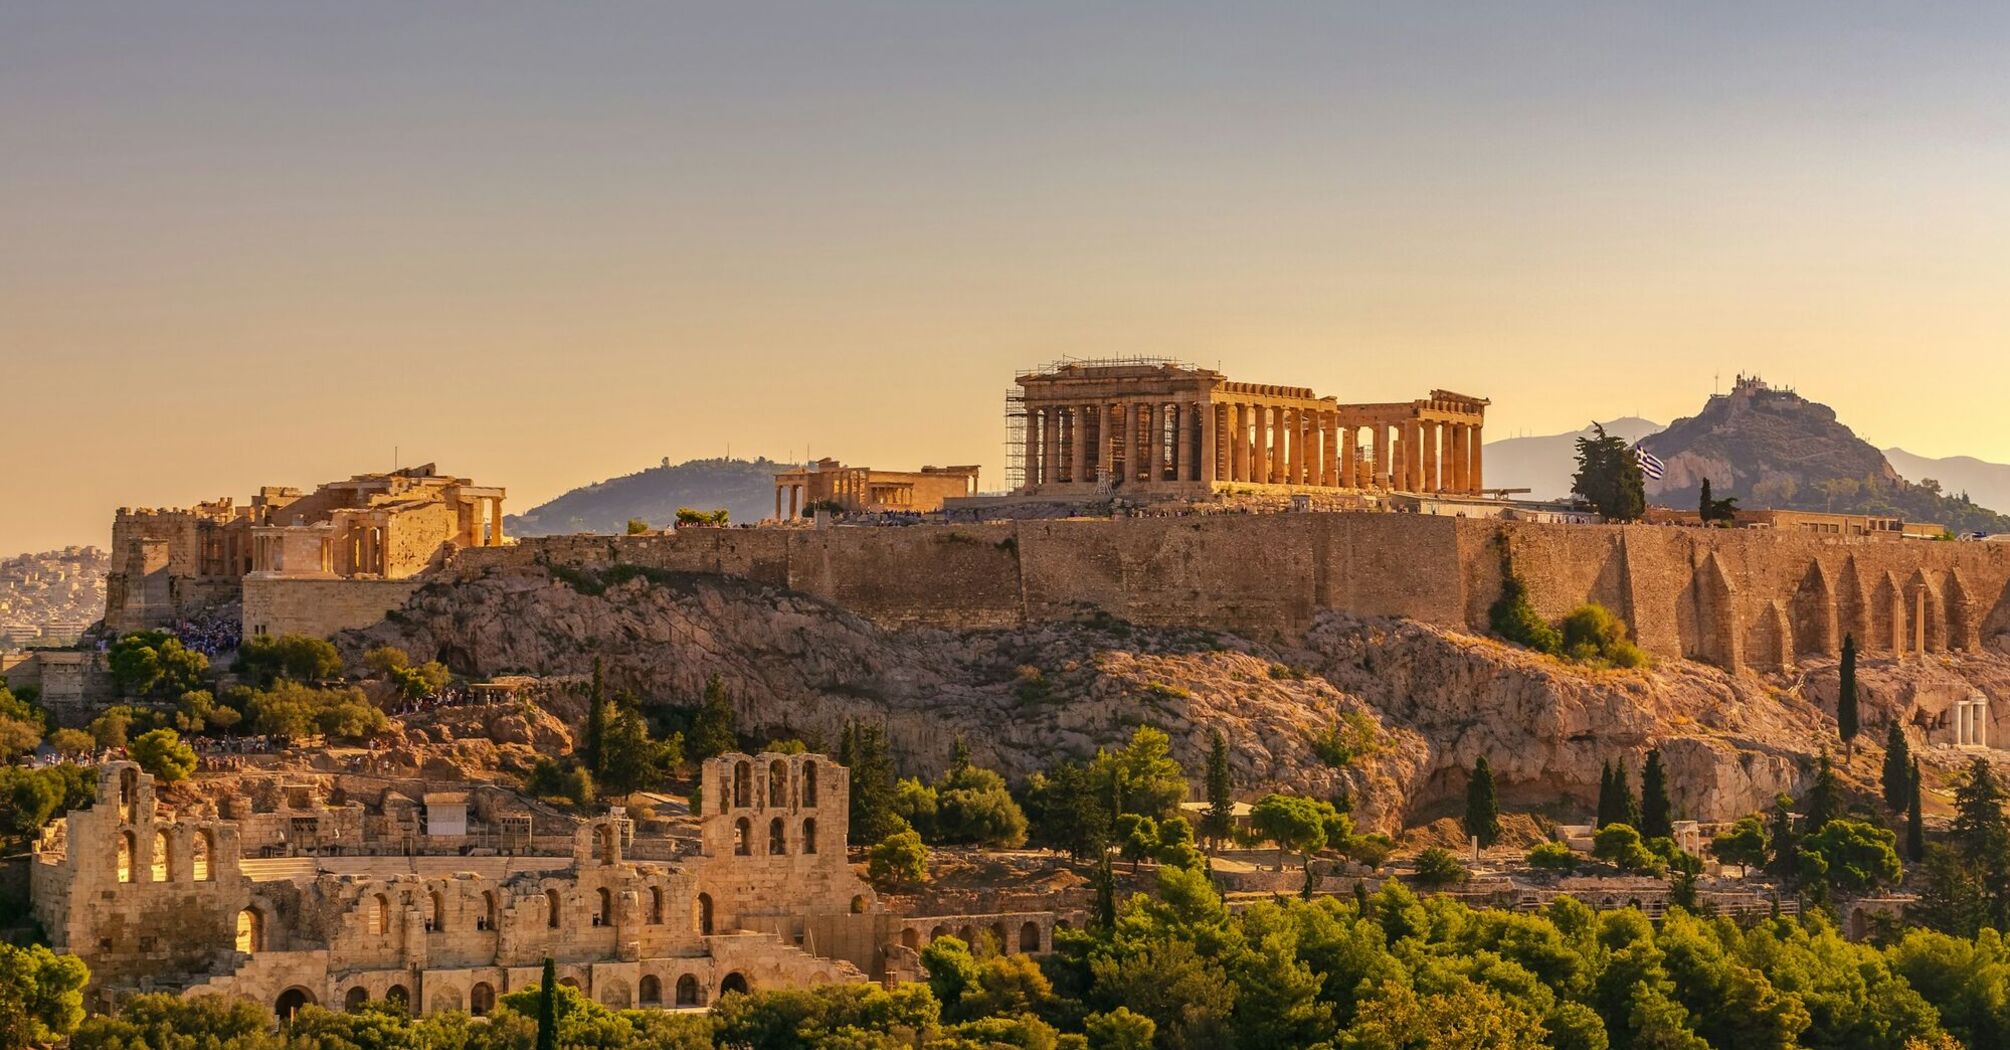 View of the Acropolis in Athens, Greece